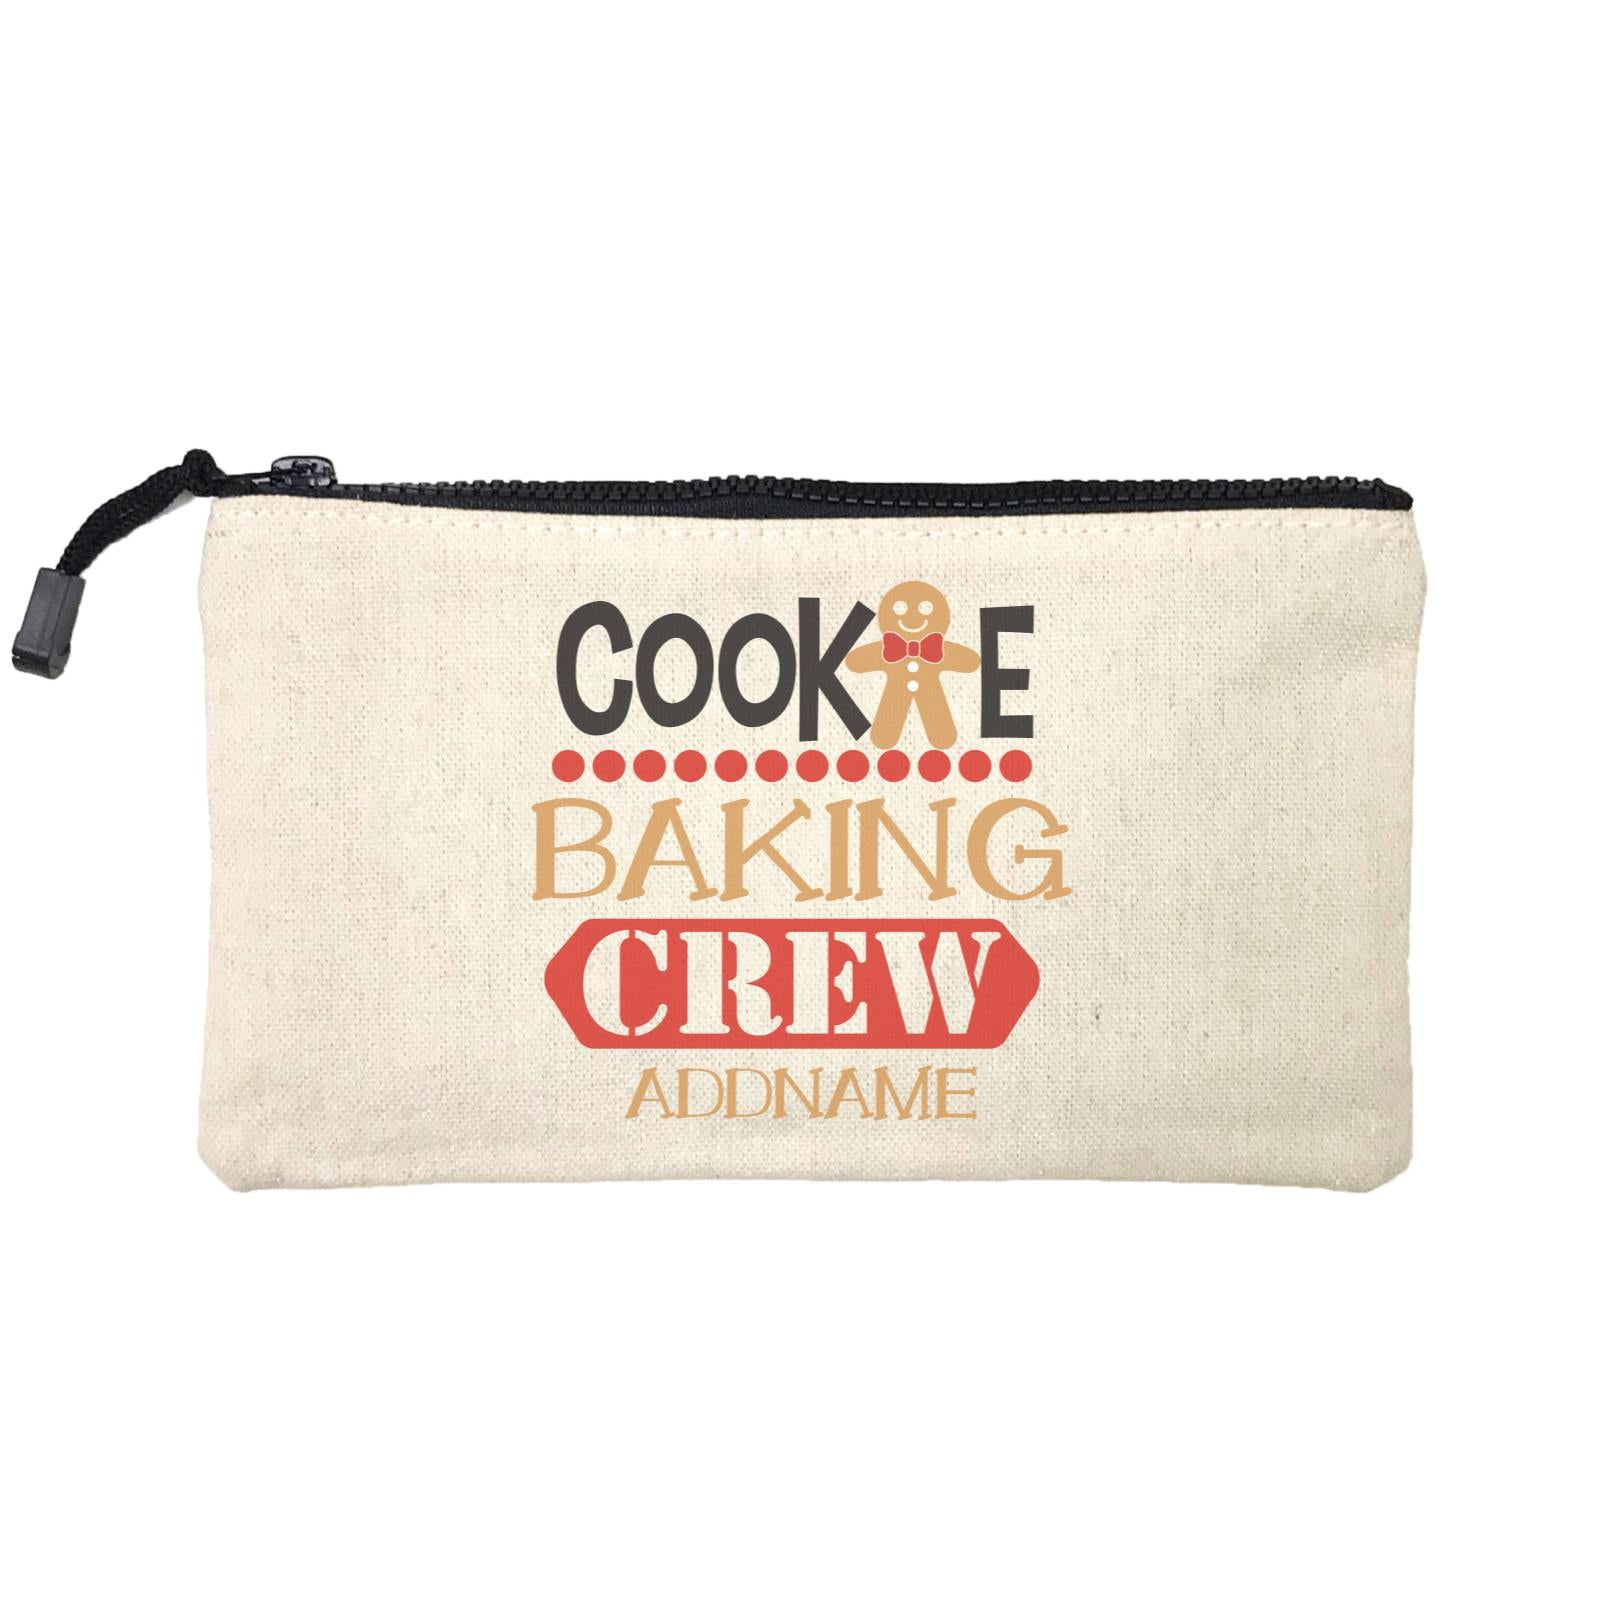 Xmas Cookie Baking Crew Mini Accessories Stationery Pouch